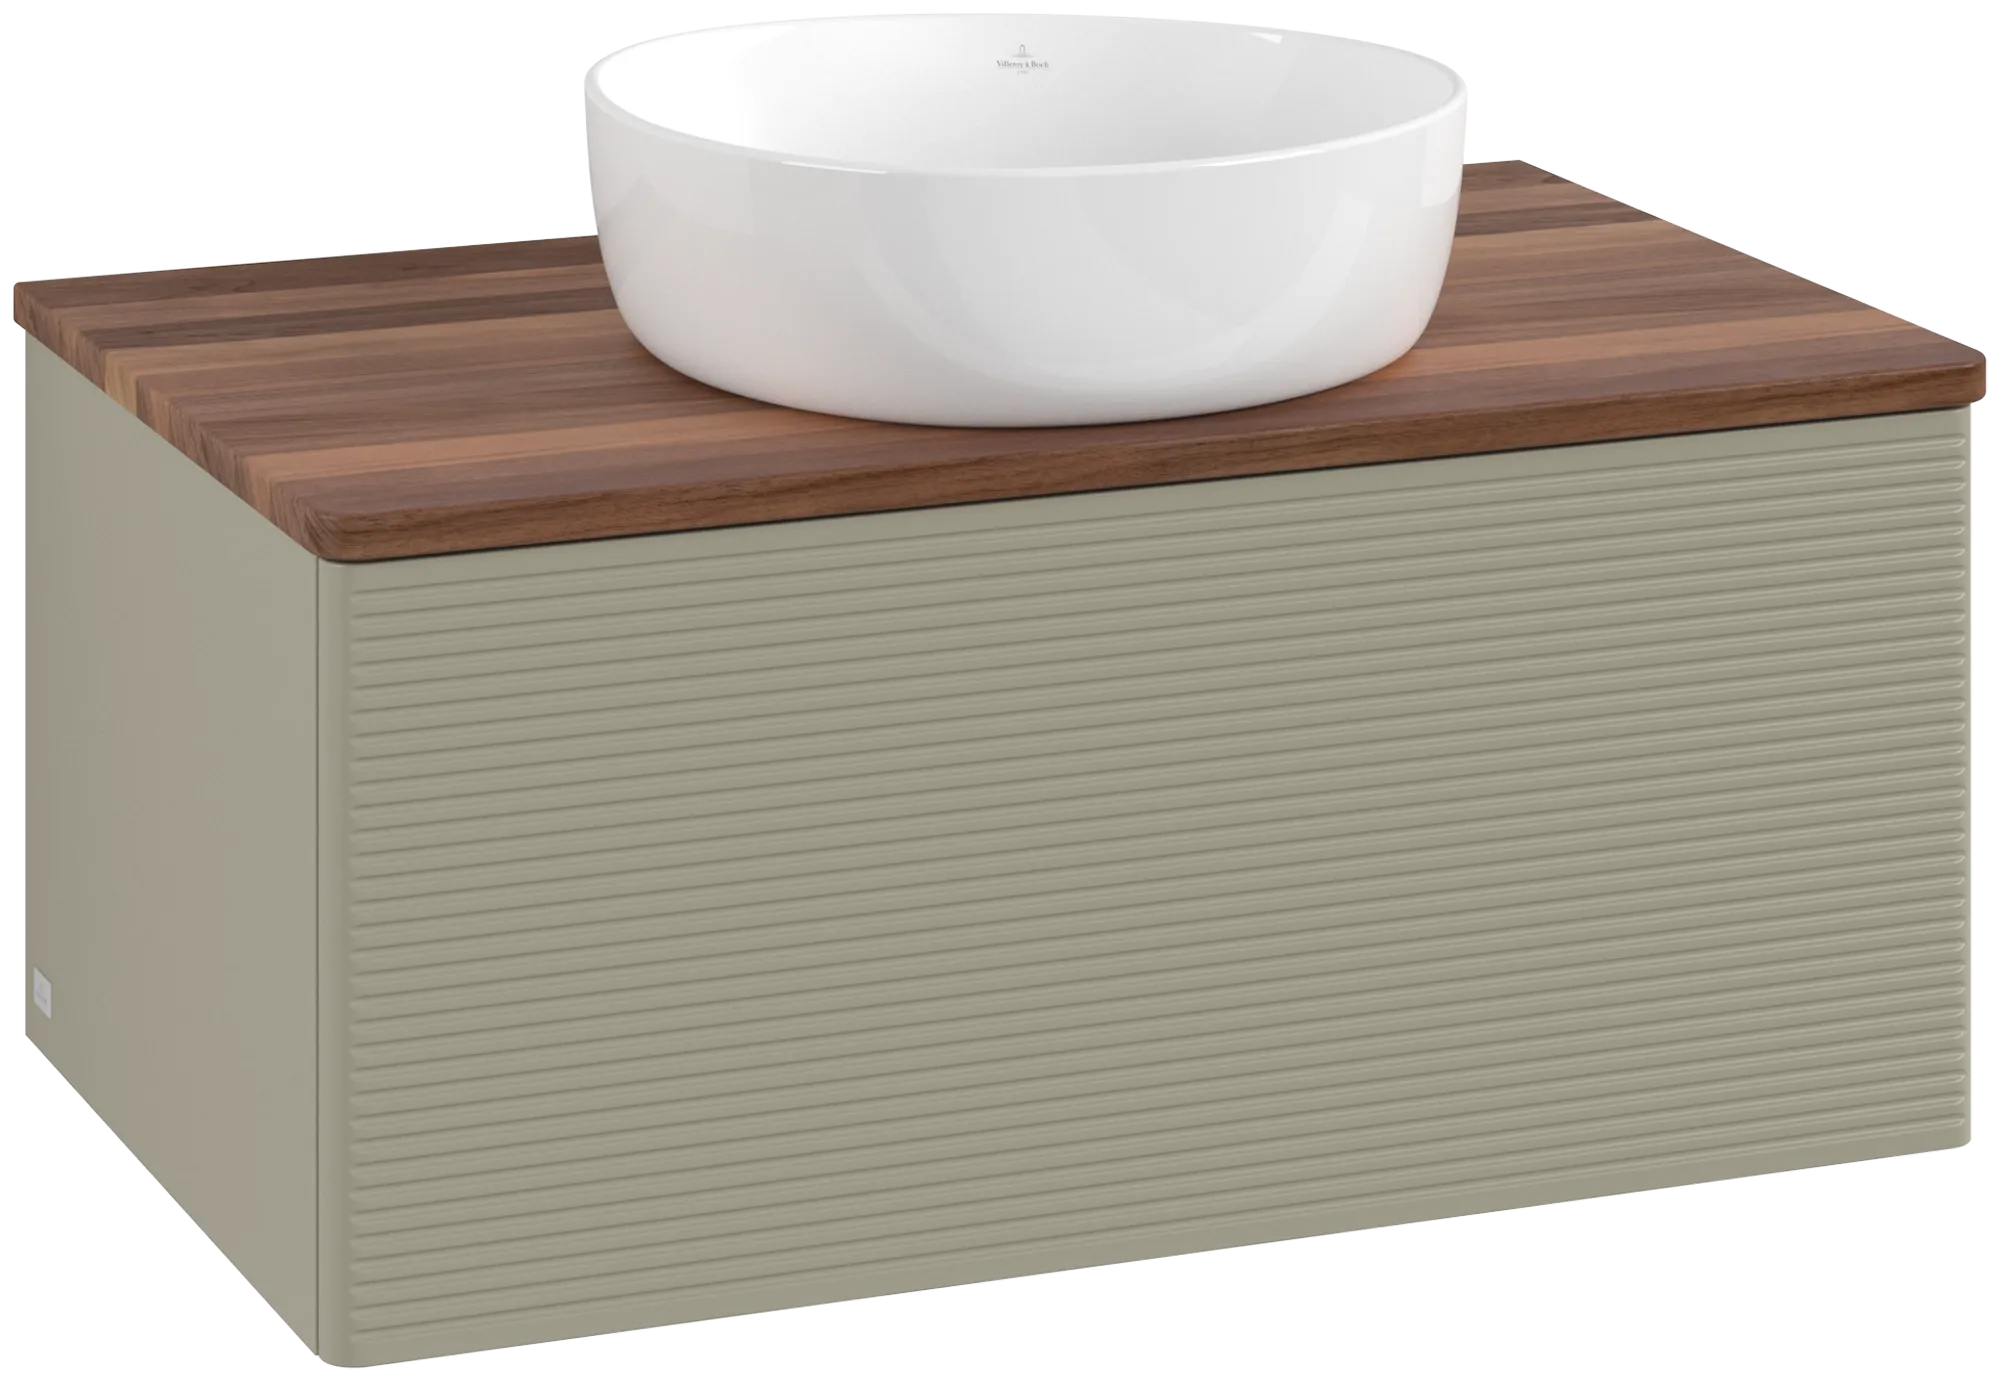 Obrázek VILLEROY BOCH Antao Vanity unit, 1 pull-out compartment, 800 x 360 x 500 mm, Front with grain texture, Stone Grey Matt Lacquer / Warm Walnut #K30112HK